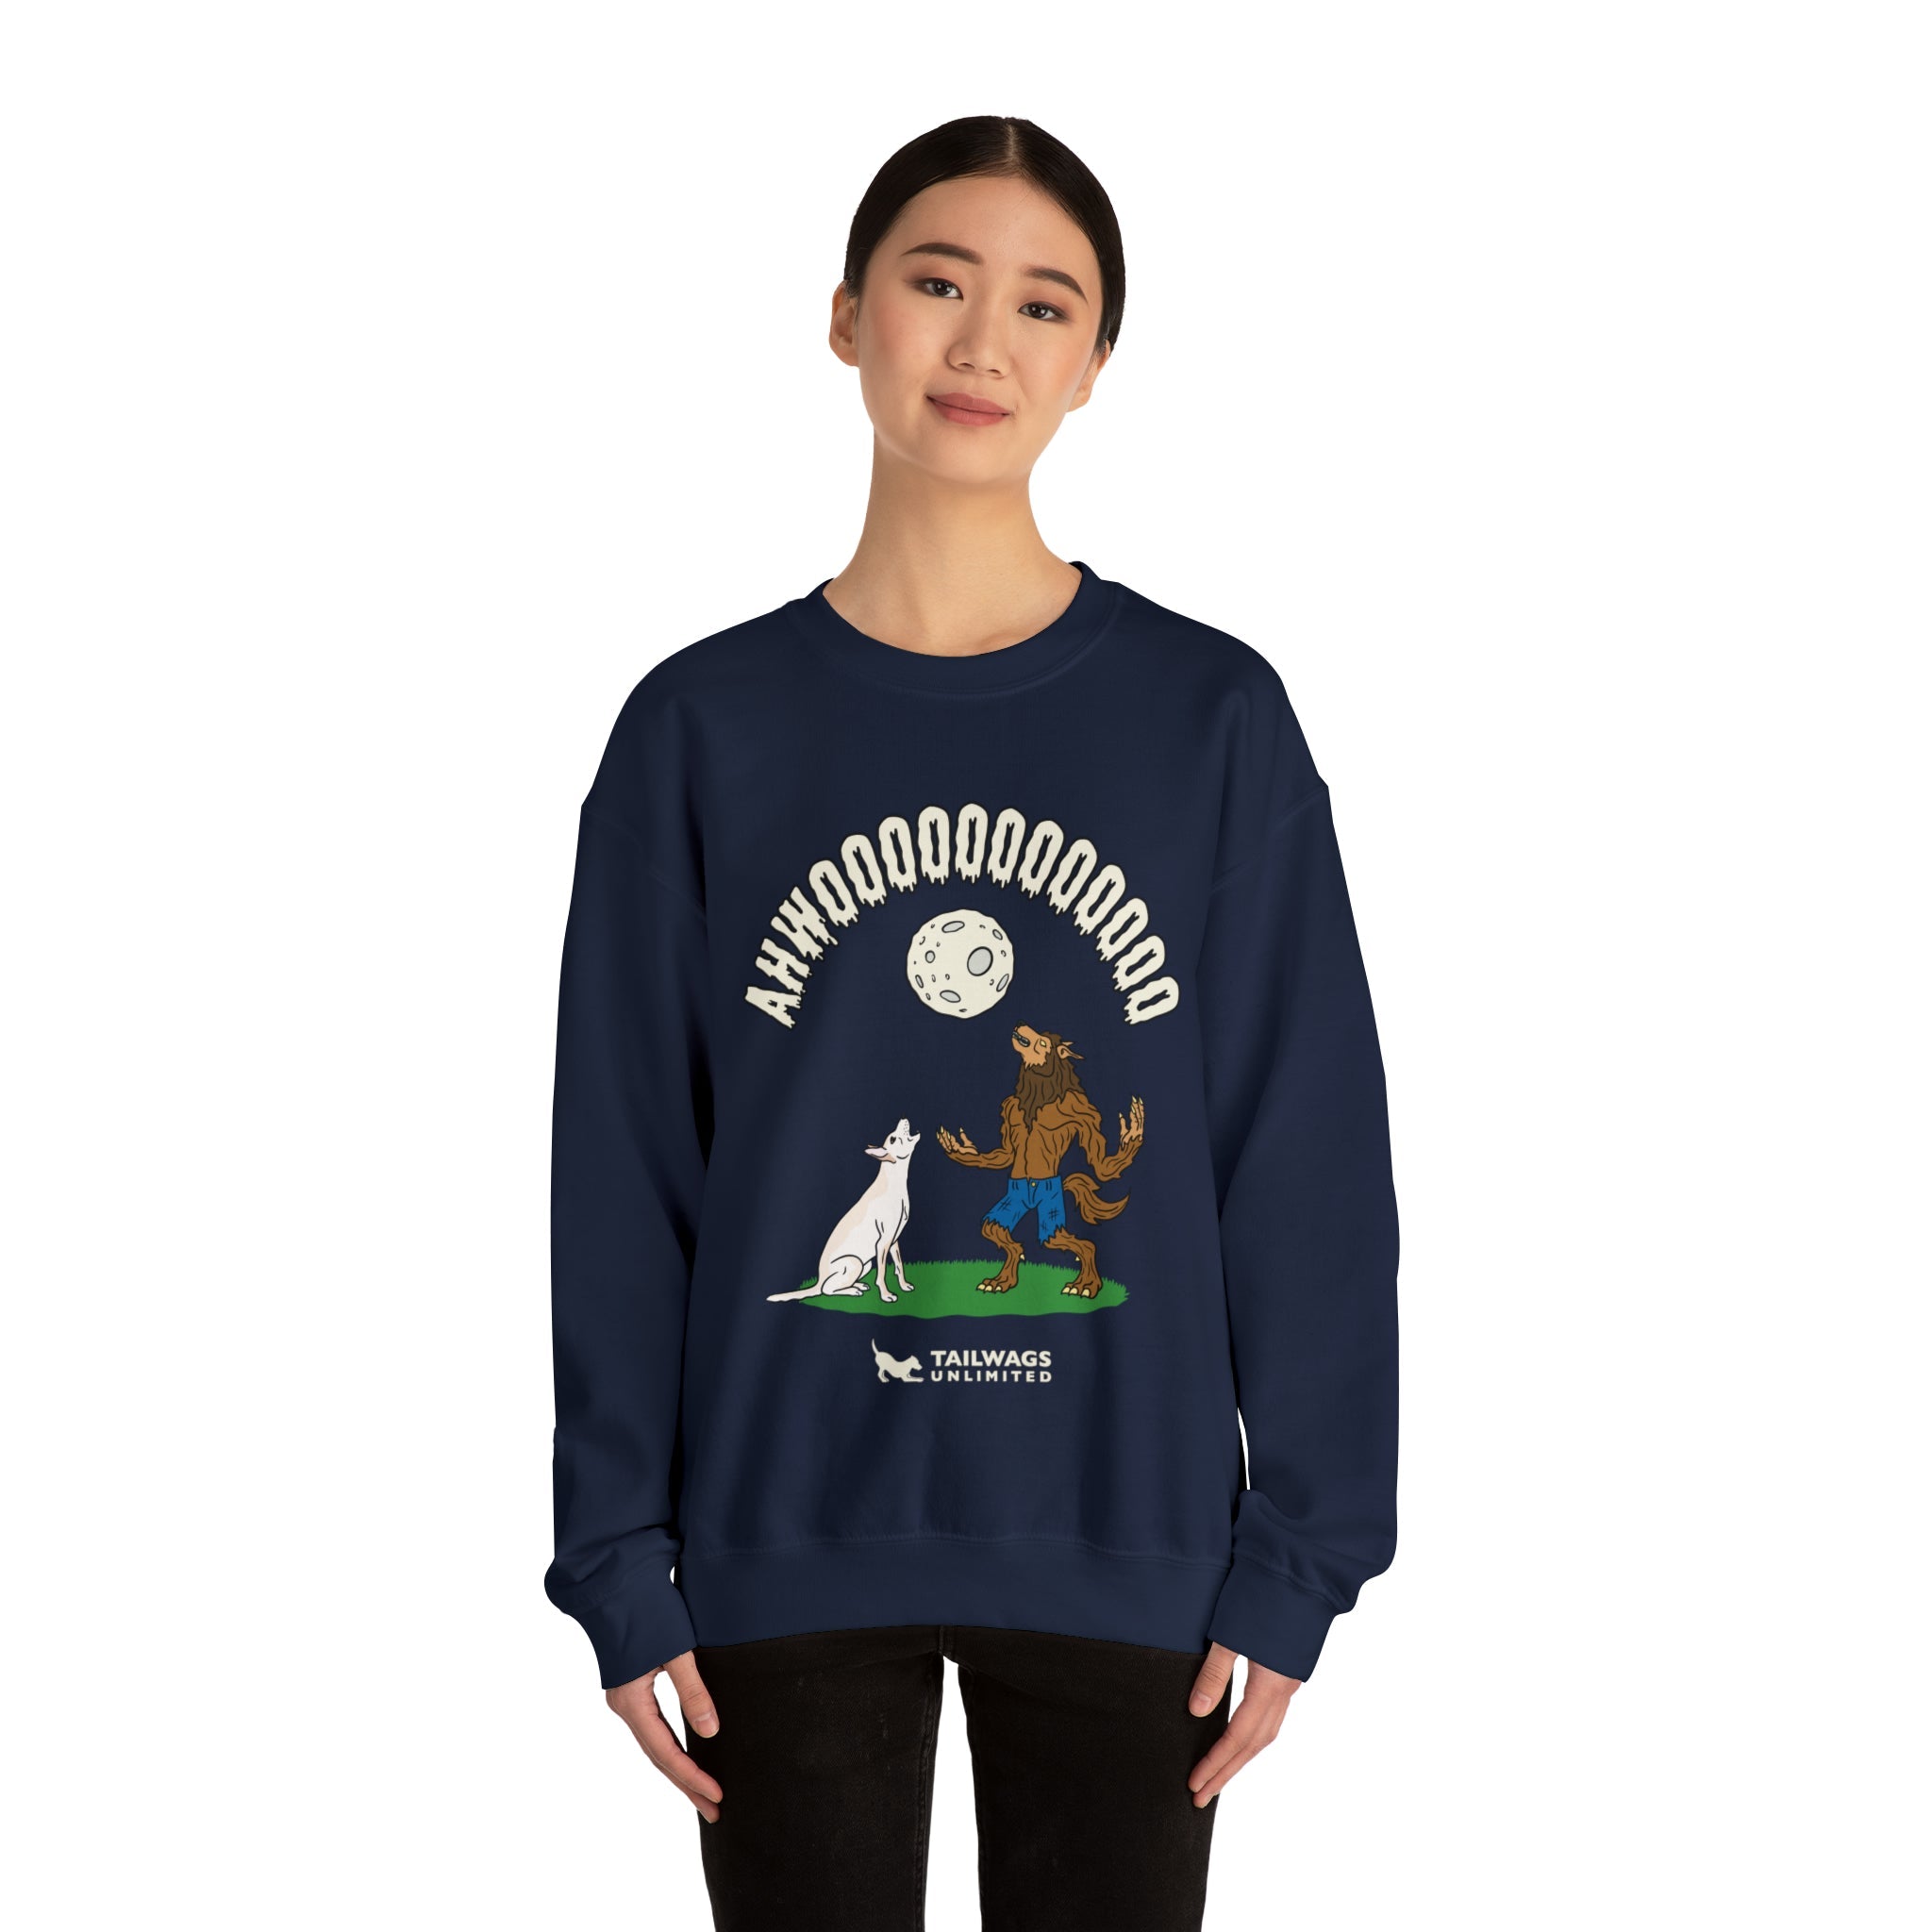 Howling at the Moon Crewneck Sweatshirt - TAILWAGS UNLIMITED